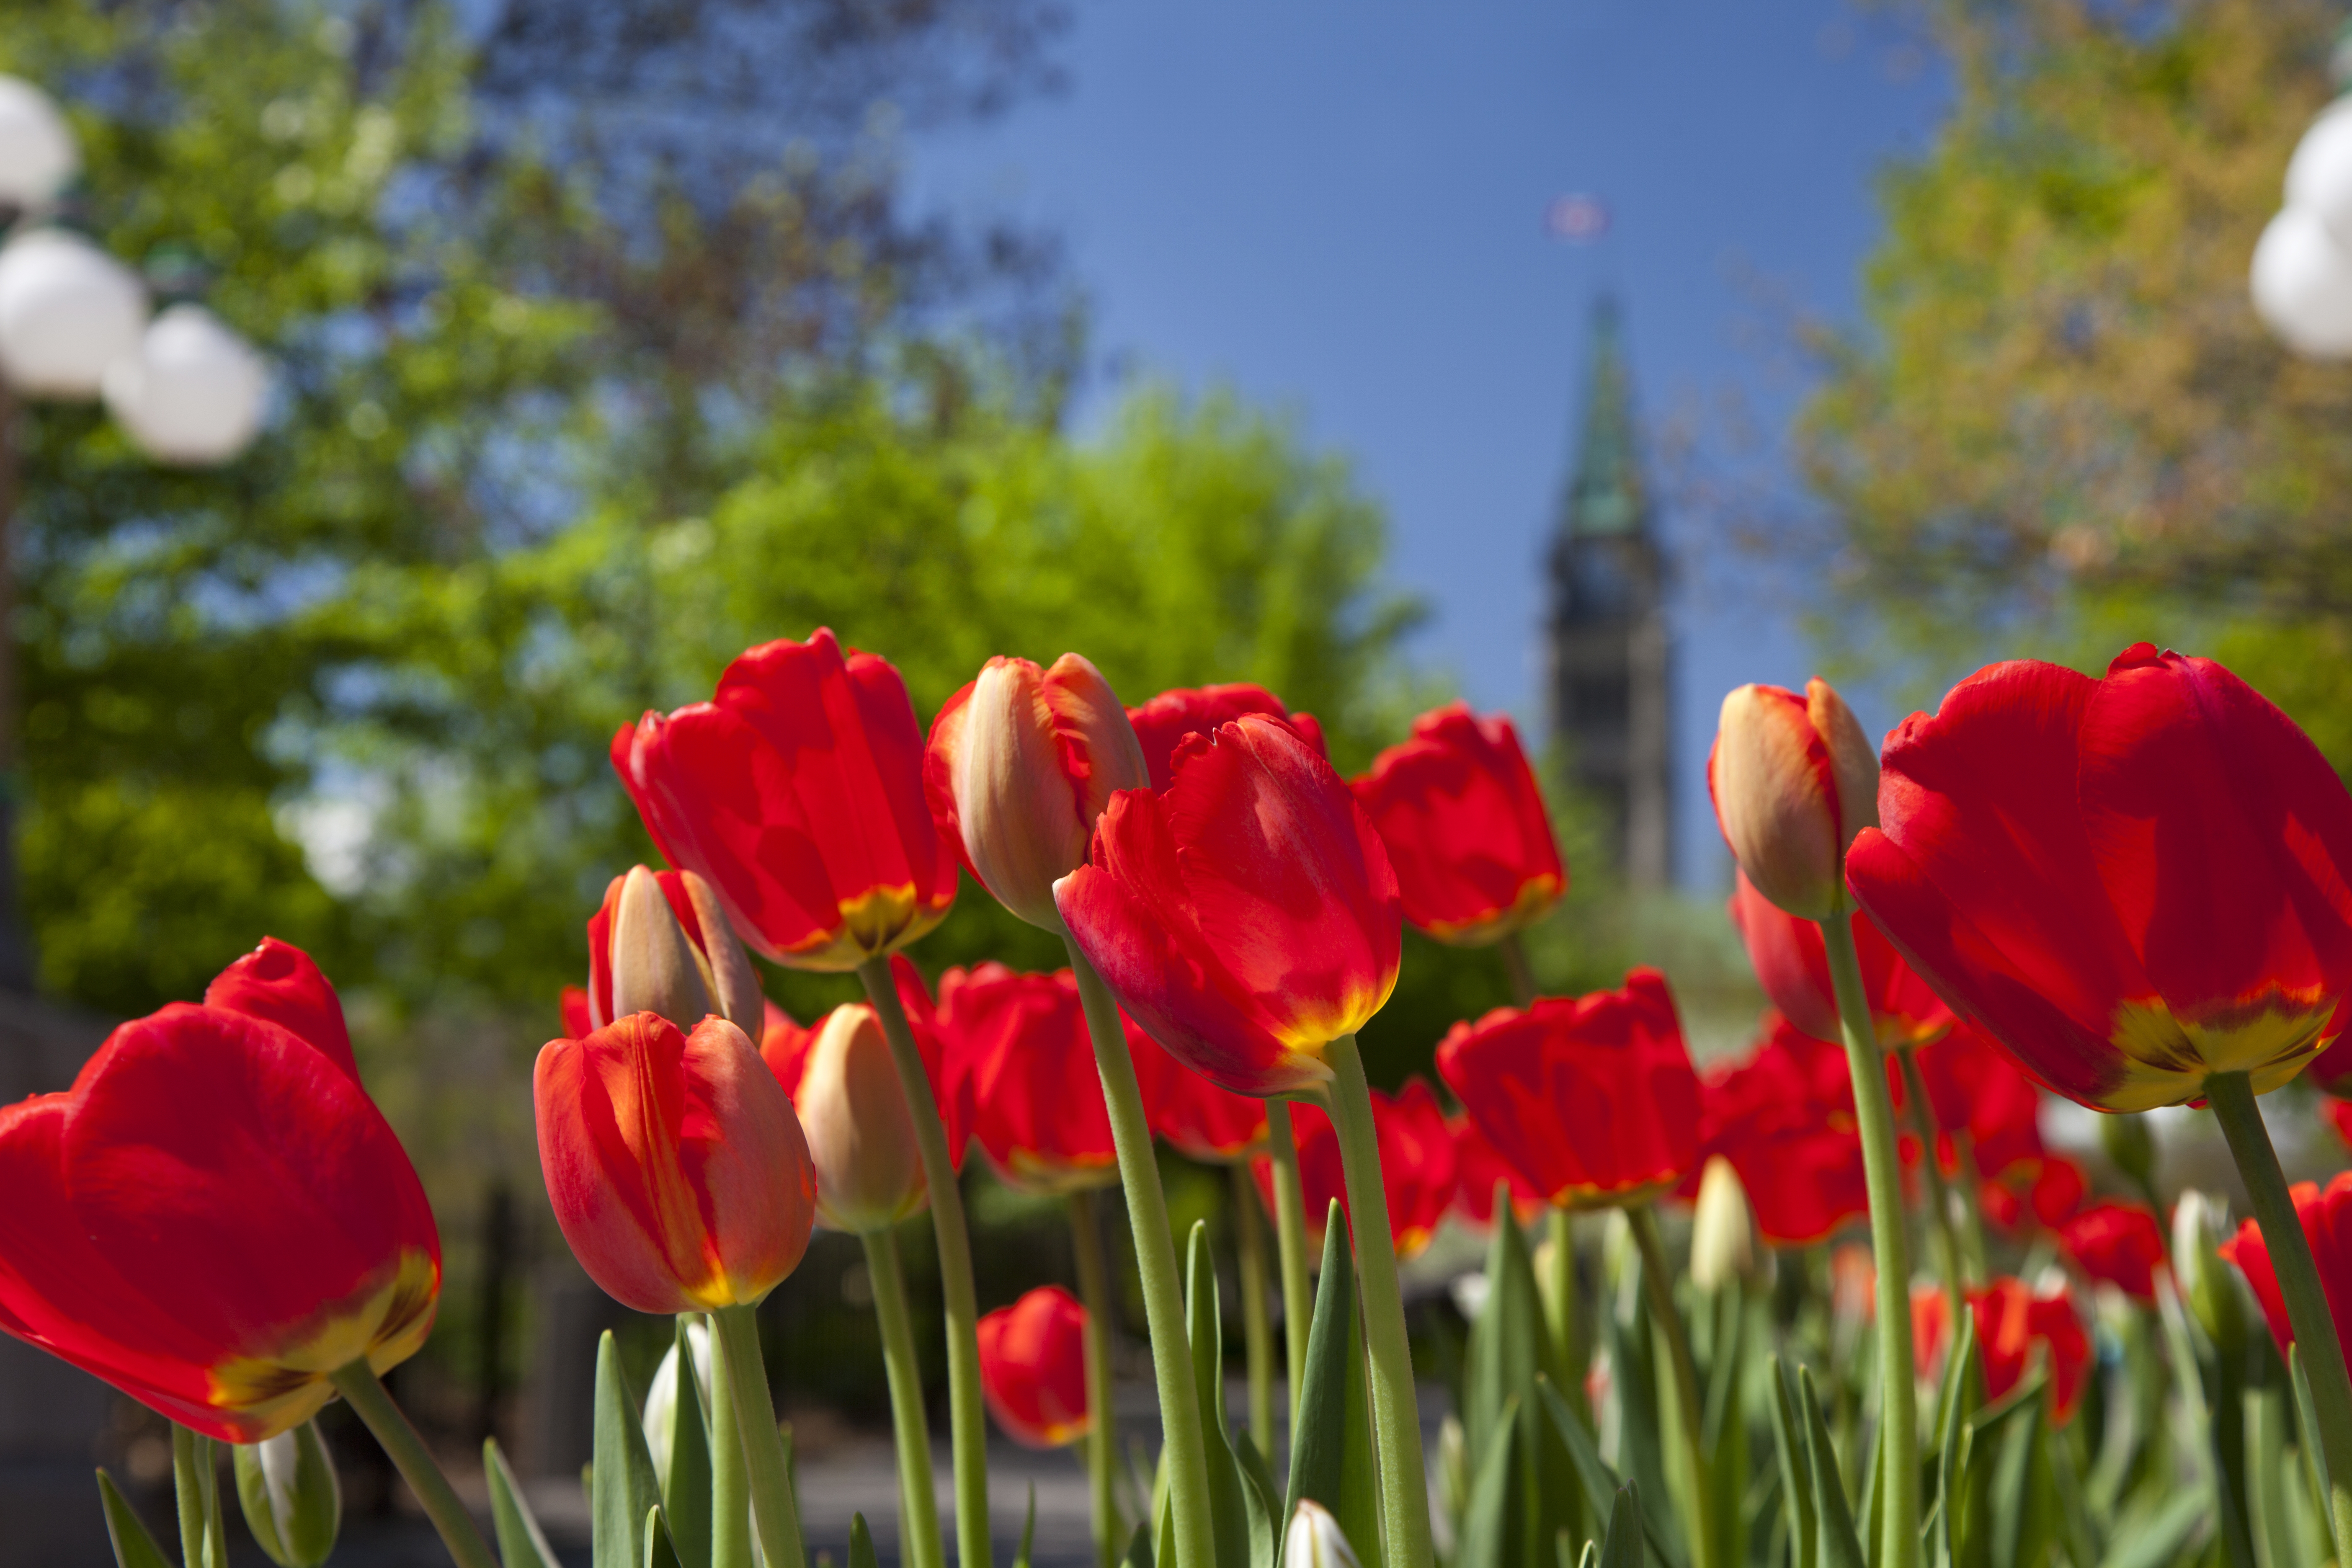 Red tulips with parliament and trees in the background